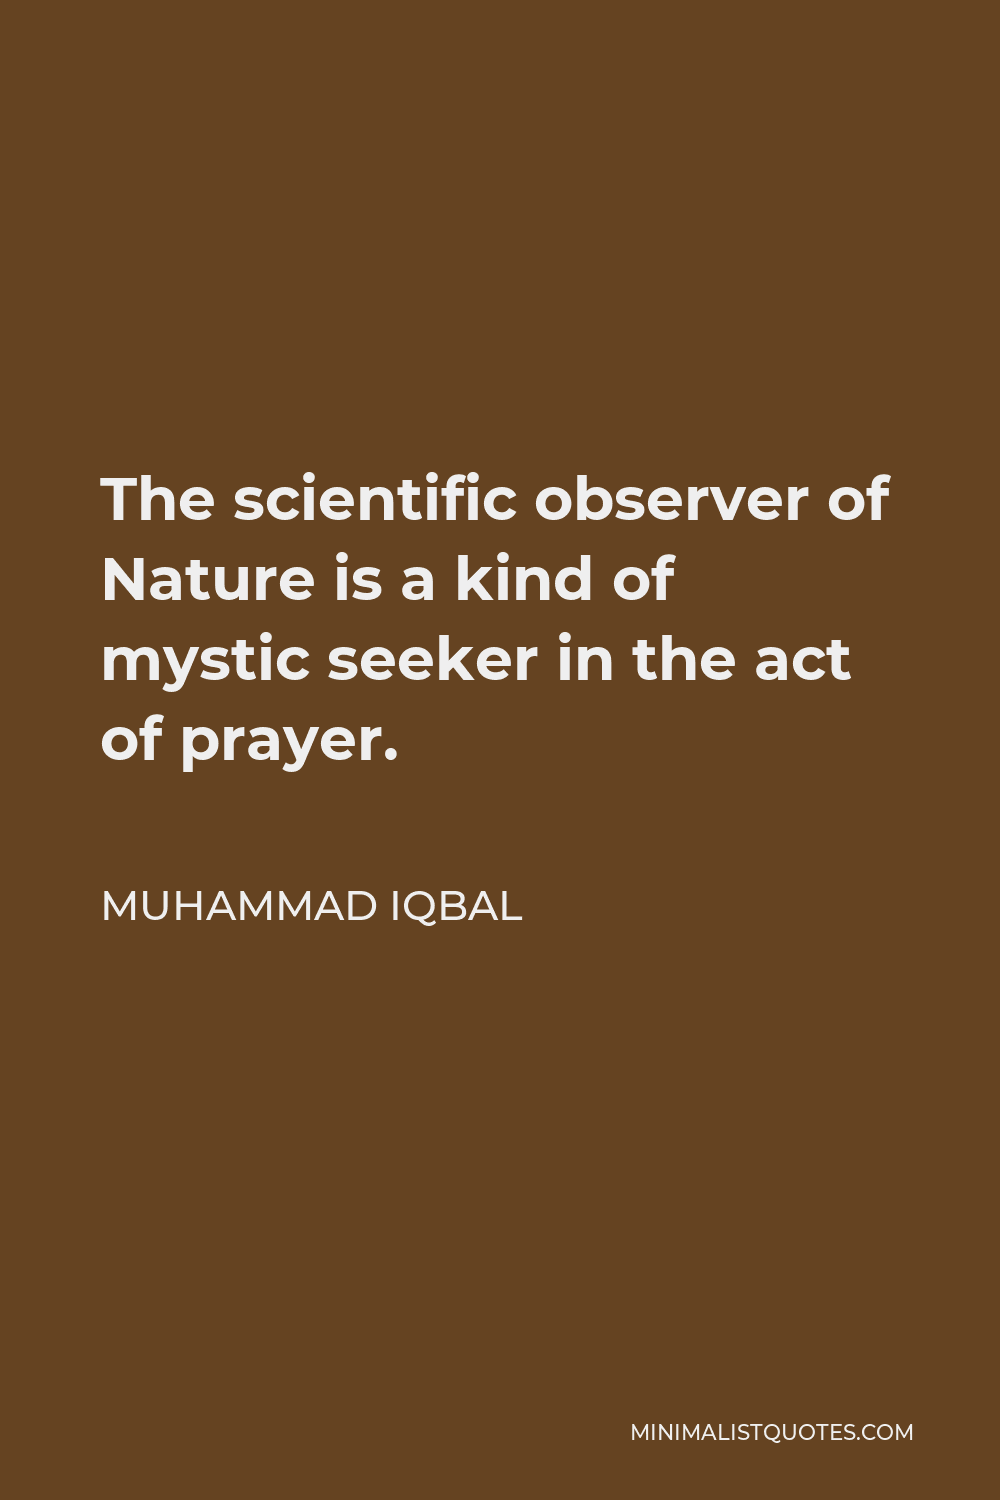 Muhammad Iqbal Quote - The scientific observer of Nature is a kind of mystic seeker in the act of prayer.